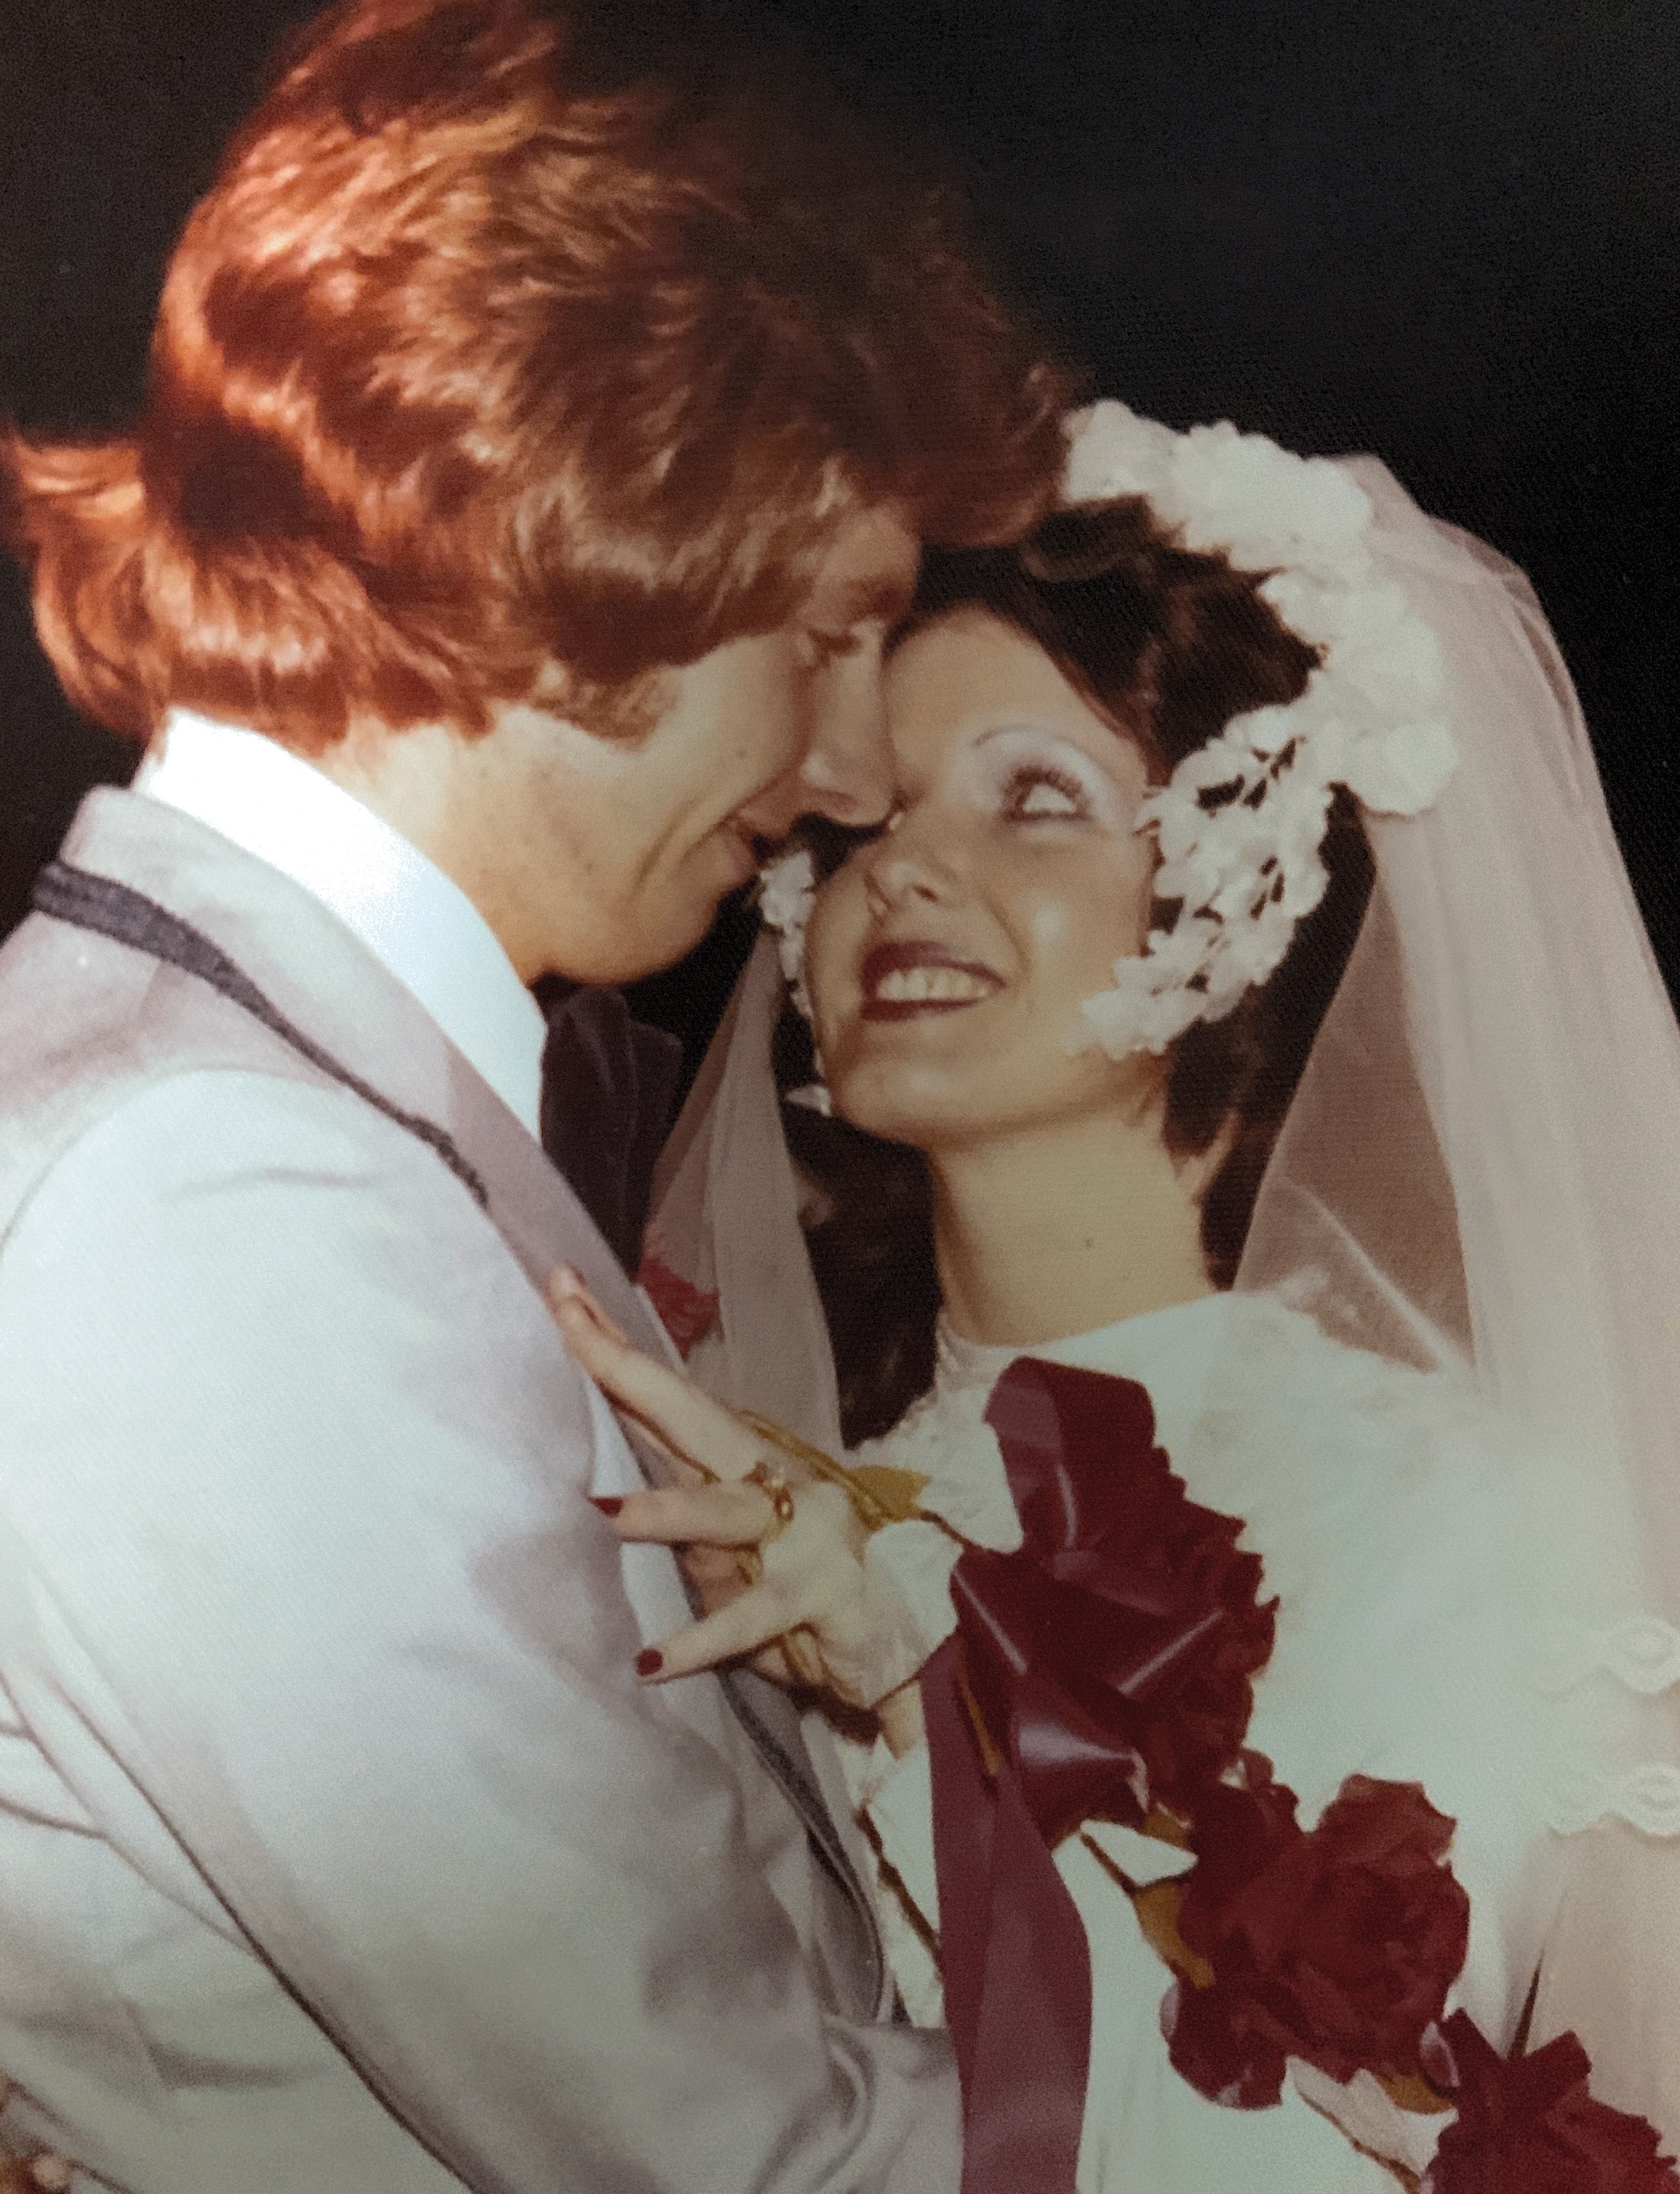 Our wedding day 31/05/1975